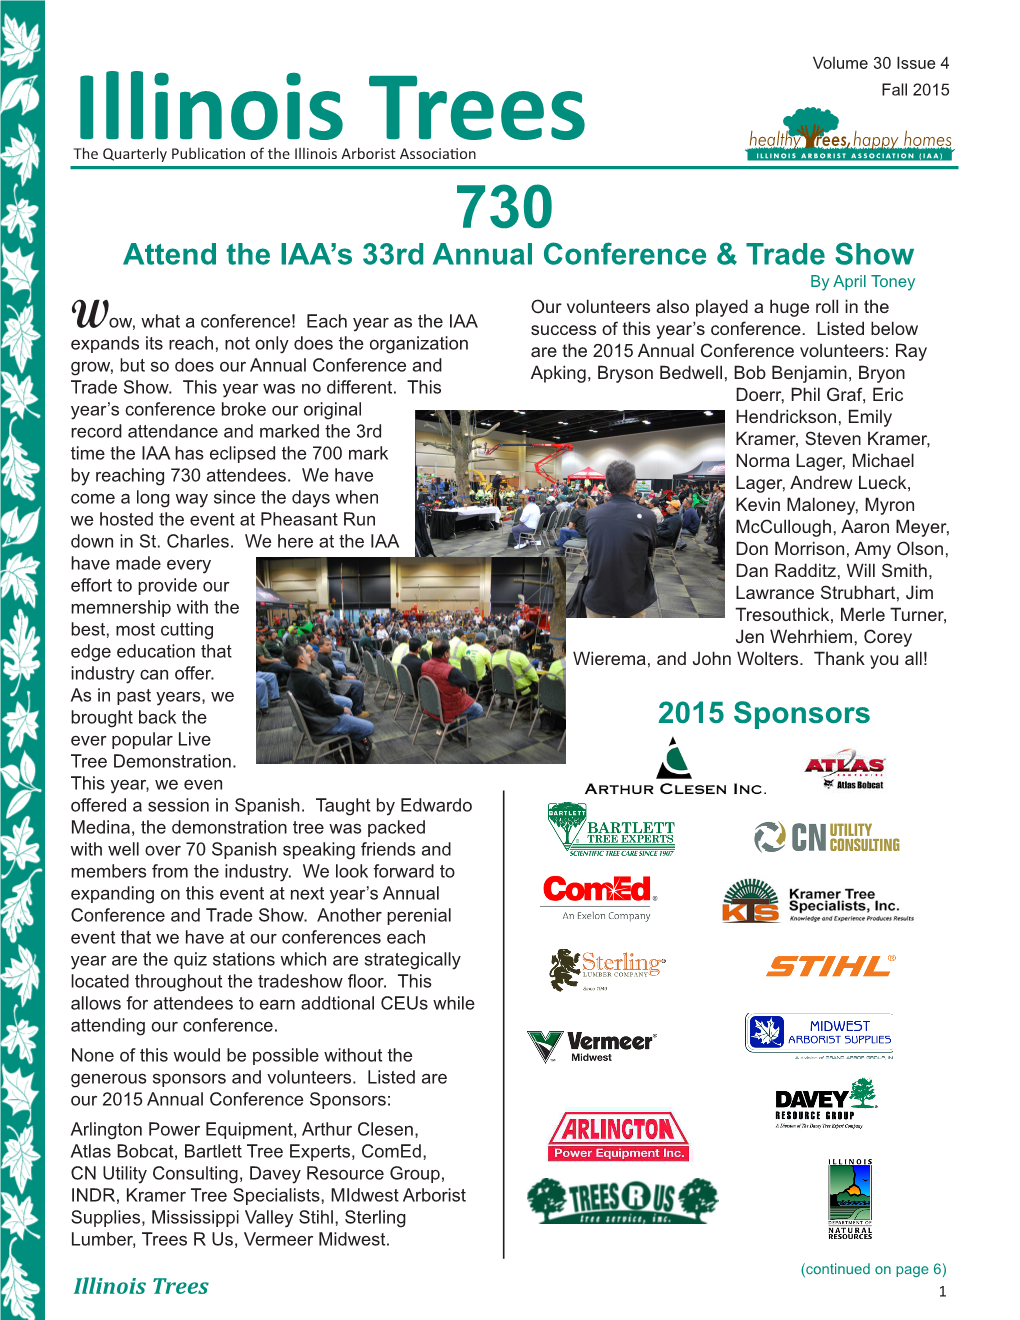 Attend the IAA's 33Rd Annual Conference & Trade Show 2015